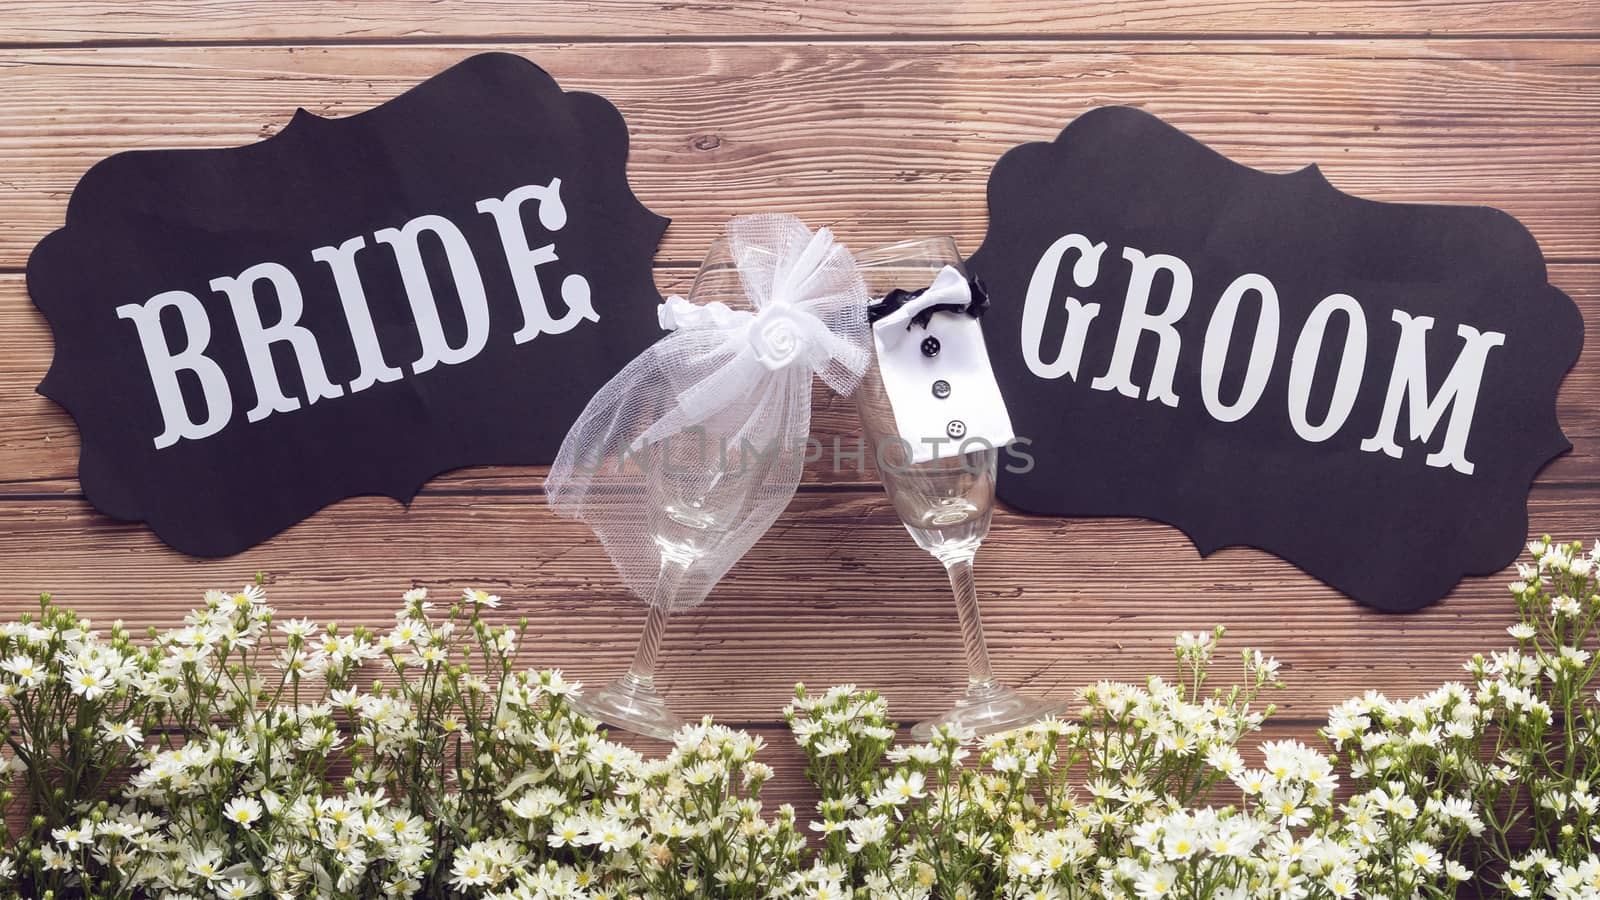 champagne glass in wedding dress with Bride and Groom text sign on wooden background decorated with tiny white flower, vintage style. wedding sign concept by asiandelight